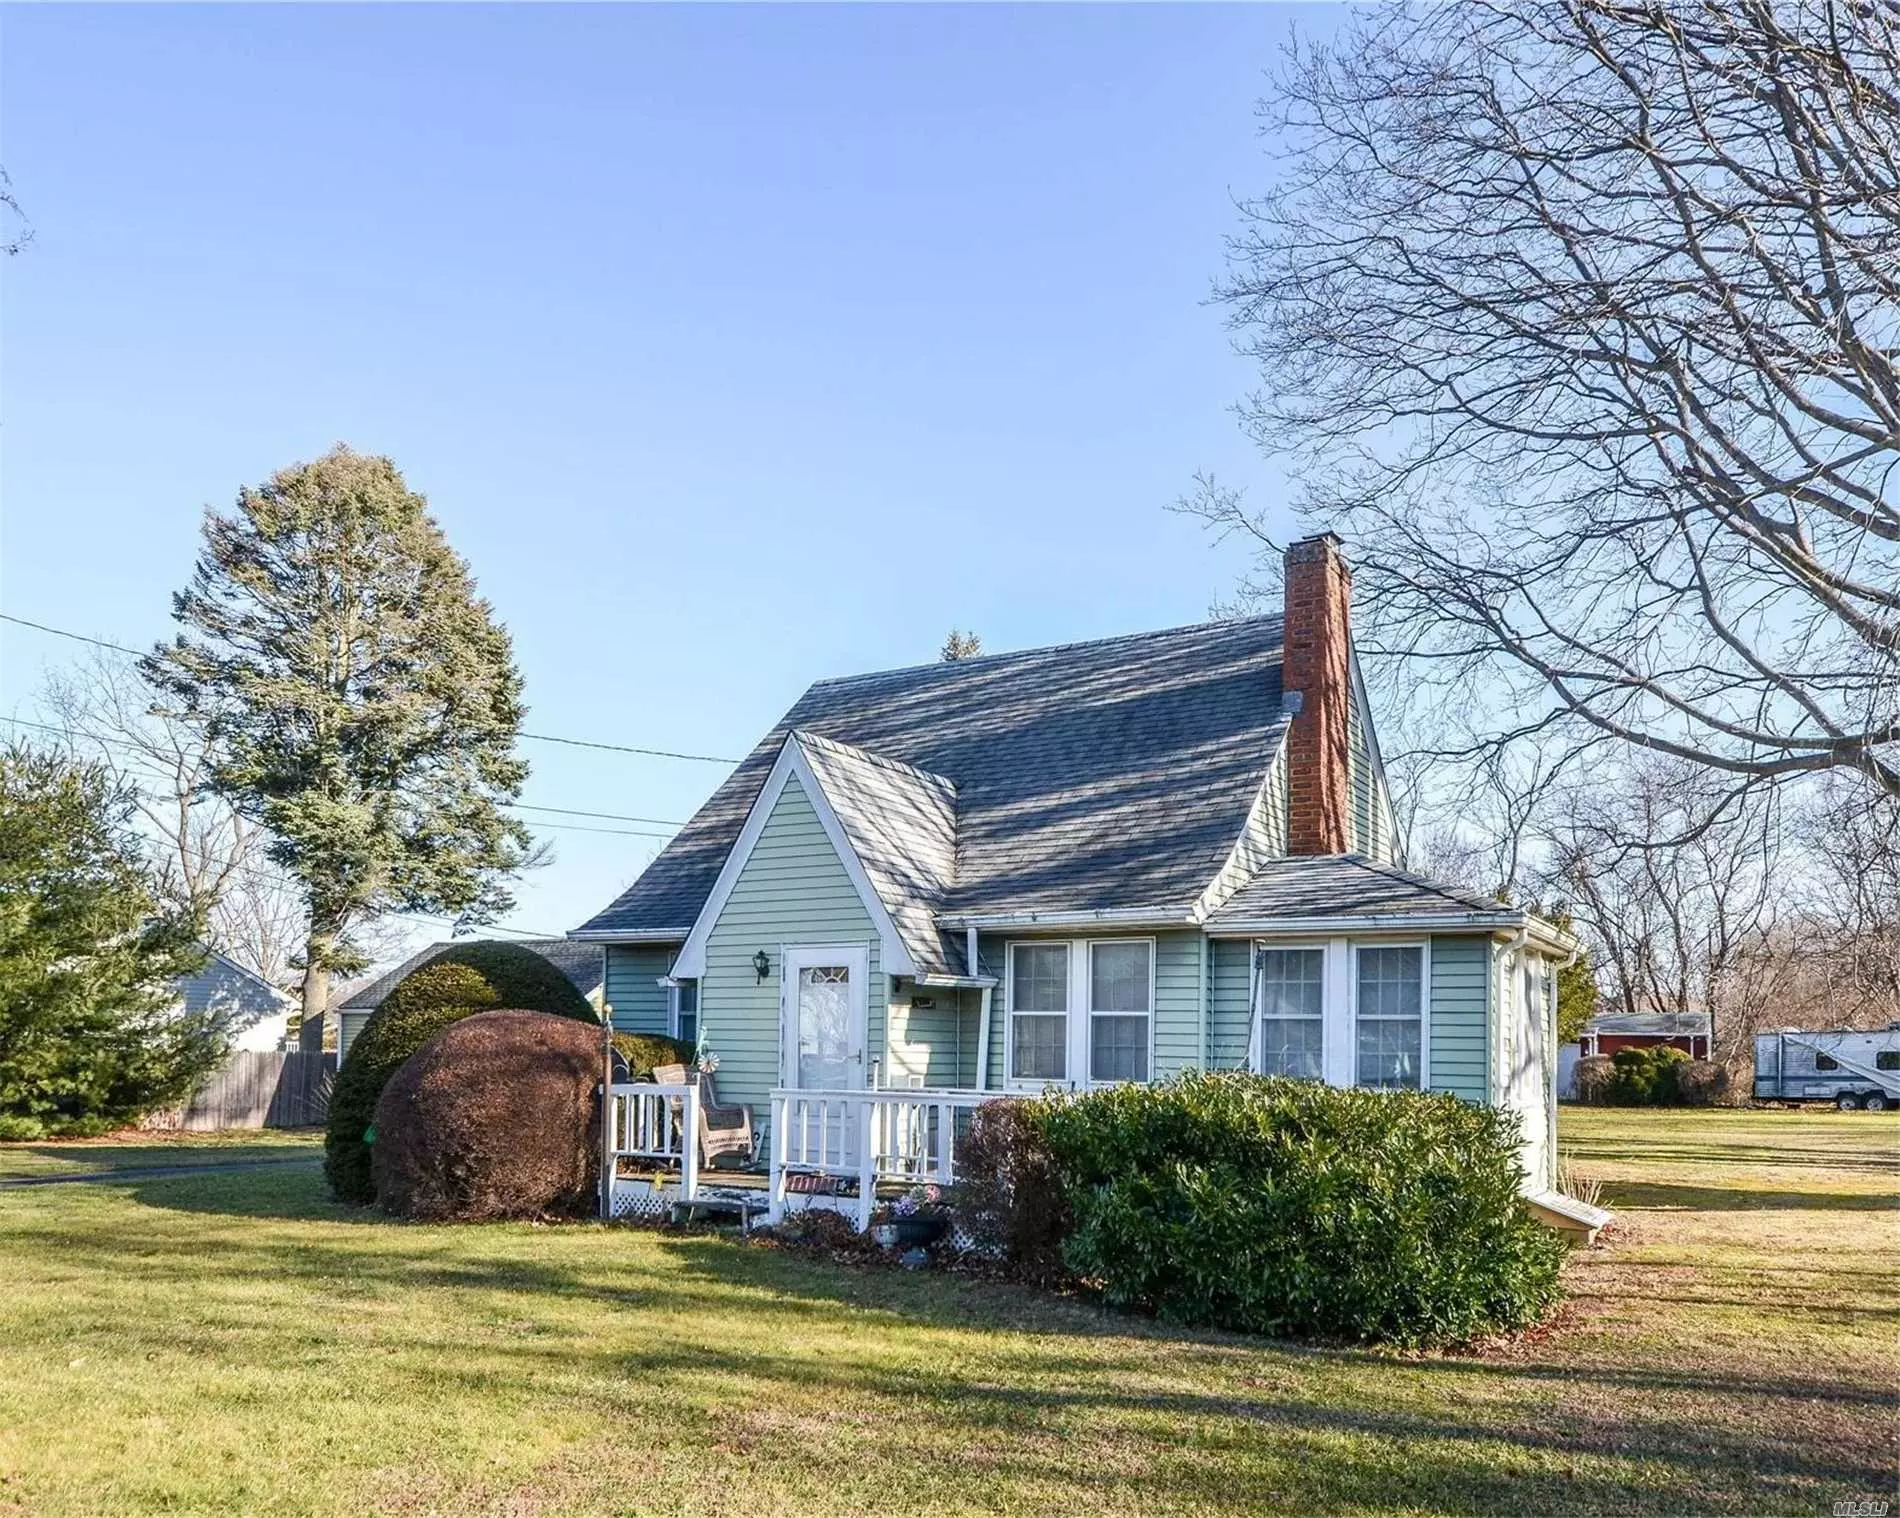 Quaint cottage loaded with character, hardwood floors, fireplace, moldings and trim. This property has 3 out buildings and plenty of room to expand. Less than 1 mile to South Harbor Beach, which is known for its expanded sandy beach and access to kayaking.